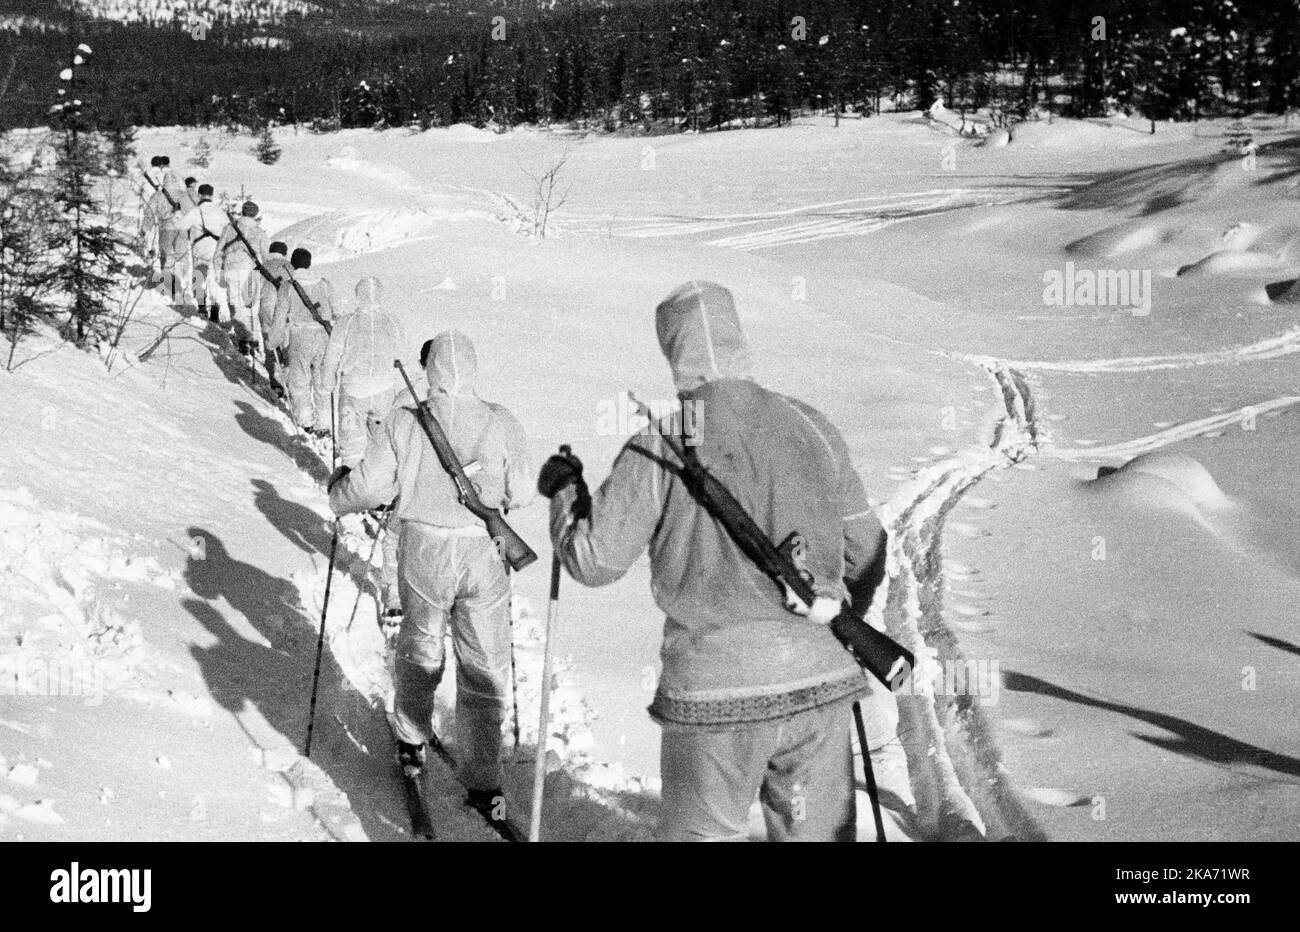 Norway during German occupation 1940-45. WW2 - Norway. Resistance. A group of armed home forces skiing Resistance battles. Home forces were led by the supreme Norwegian military command in London, and received weapons, food and even. instructors sent per. fly. Here a group of home crews on skis, with guns and wearing white disappearance suits, somewhere in Norway. Photo: NTB scanpix Stock Photo